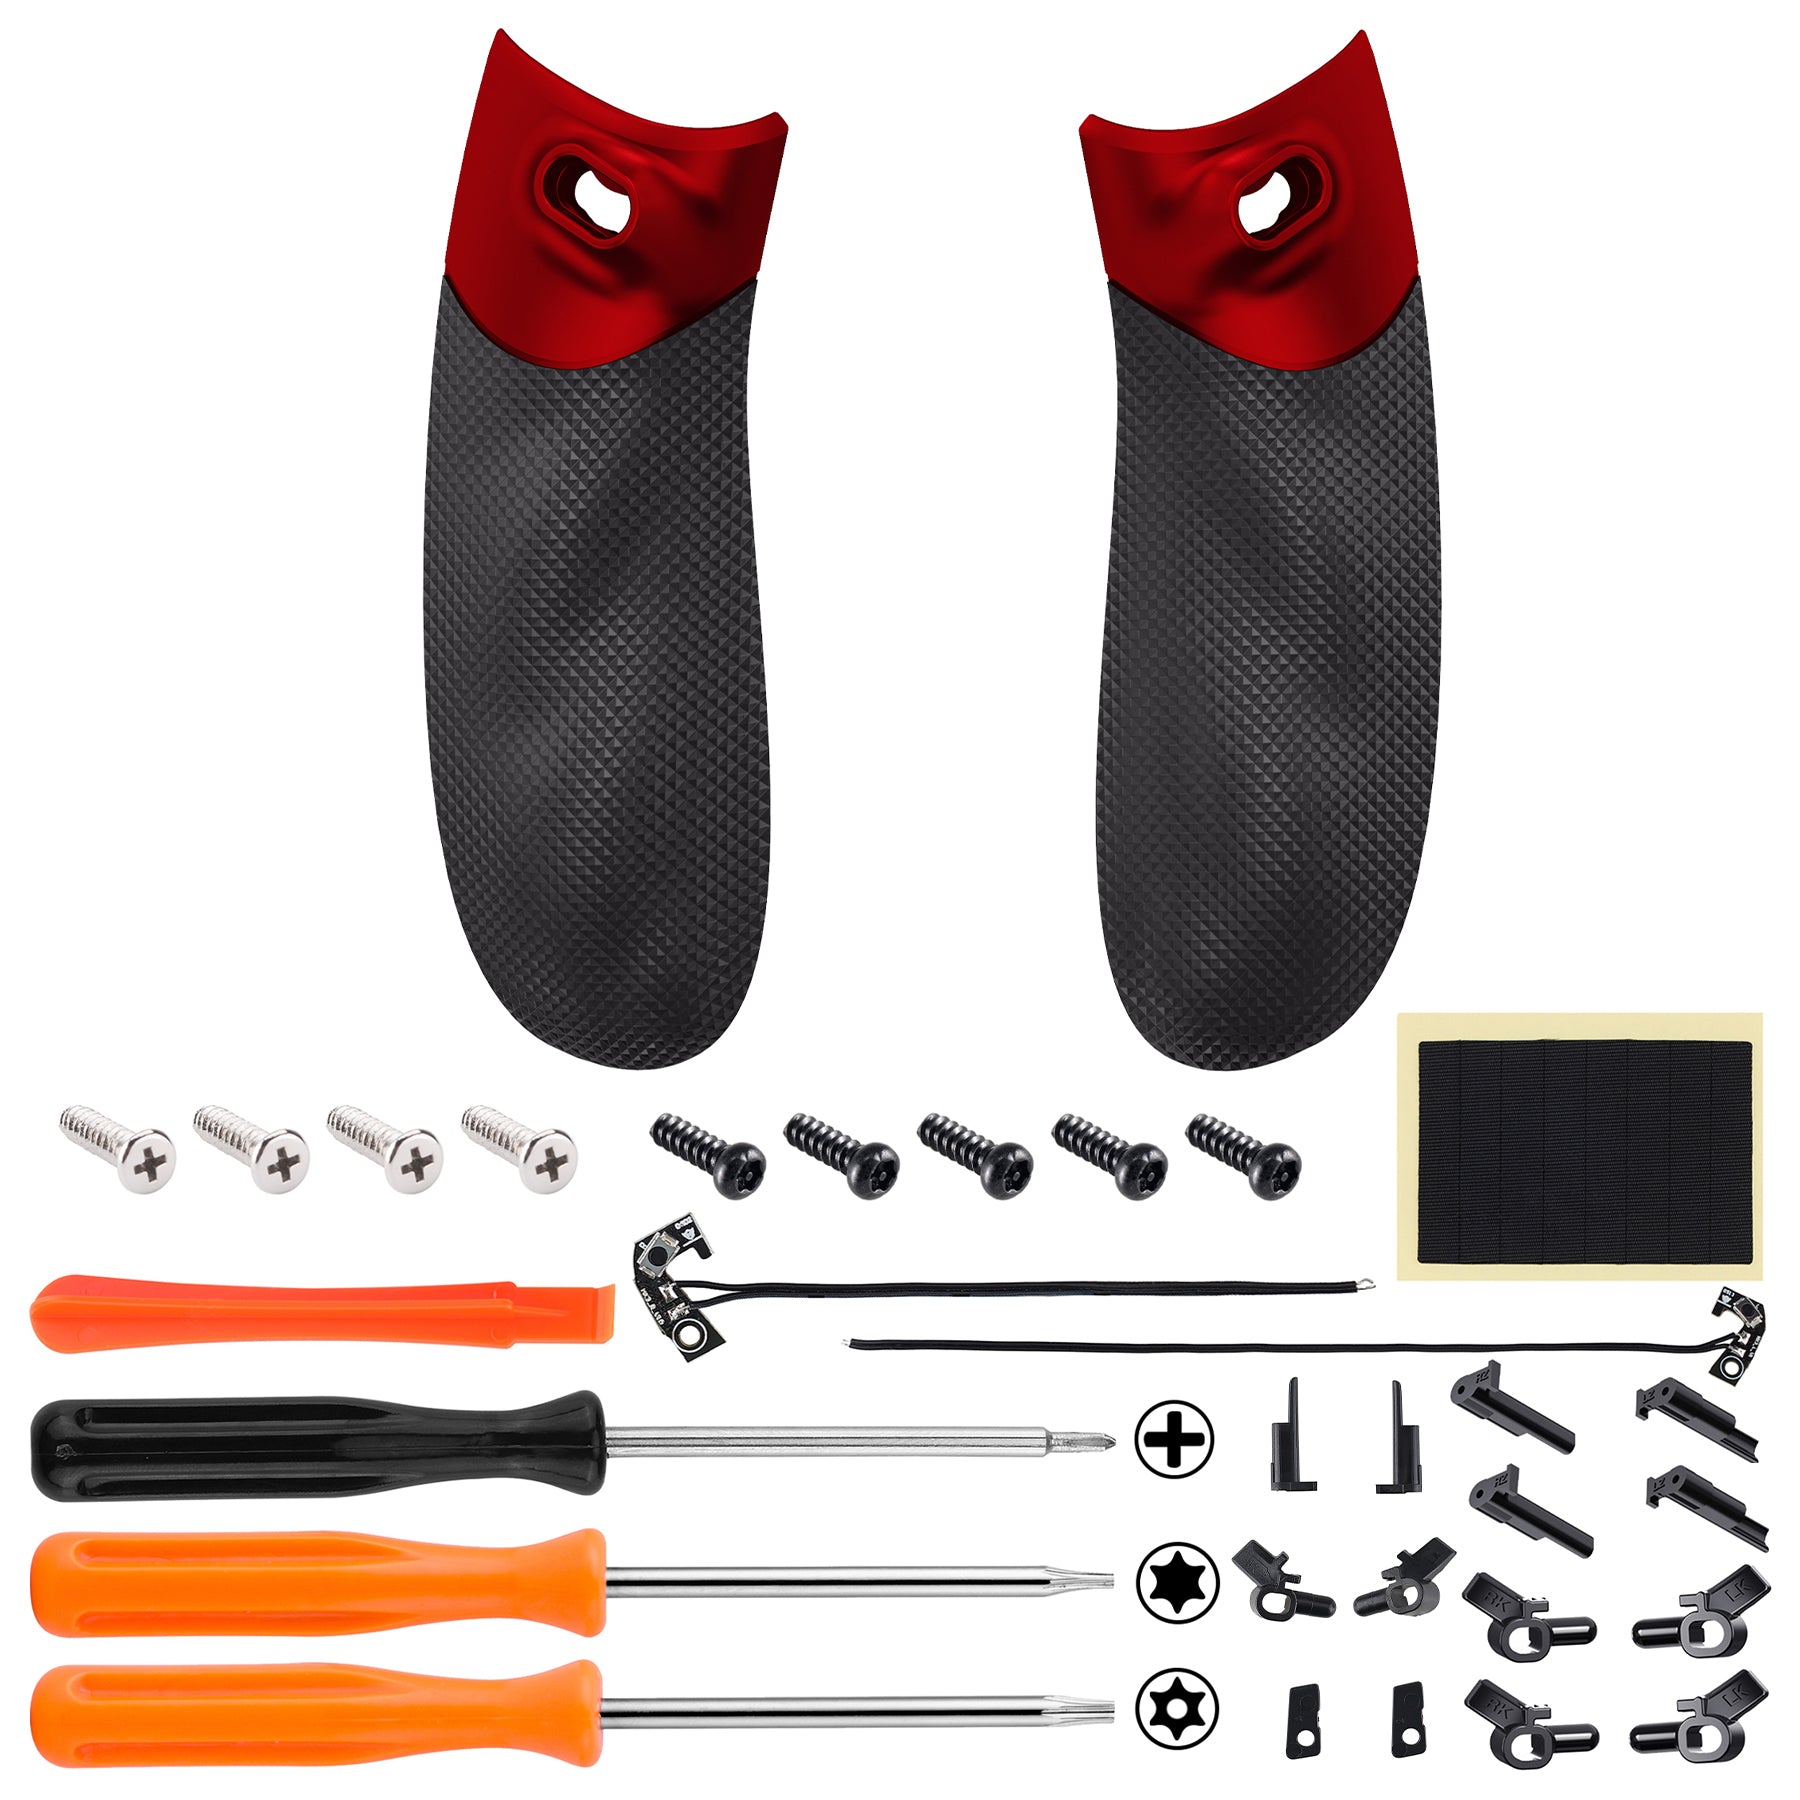 eXtremeRate Retail Flexor Clicky Rubberized Side Rail Grips Trigger Stop Kit for Xbox Series X & S Controller, Diamond Textured Scarlet Red Anti-Slip Ergonomic Trigger Stopper Handle Grips for Xbox Core Controller - PX3Q3003P